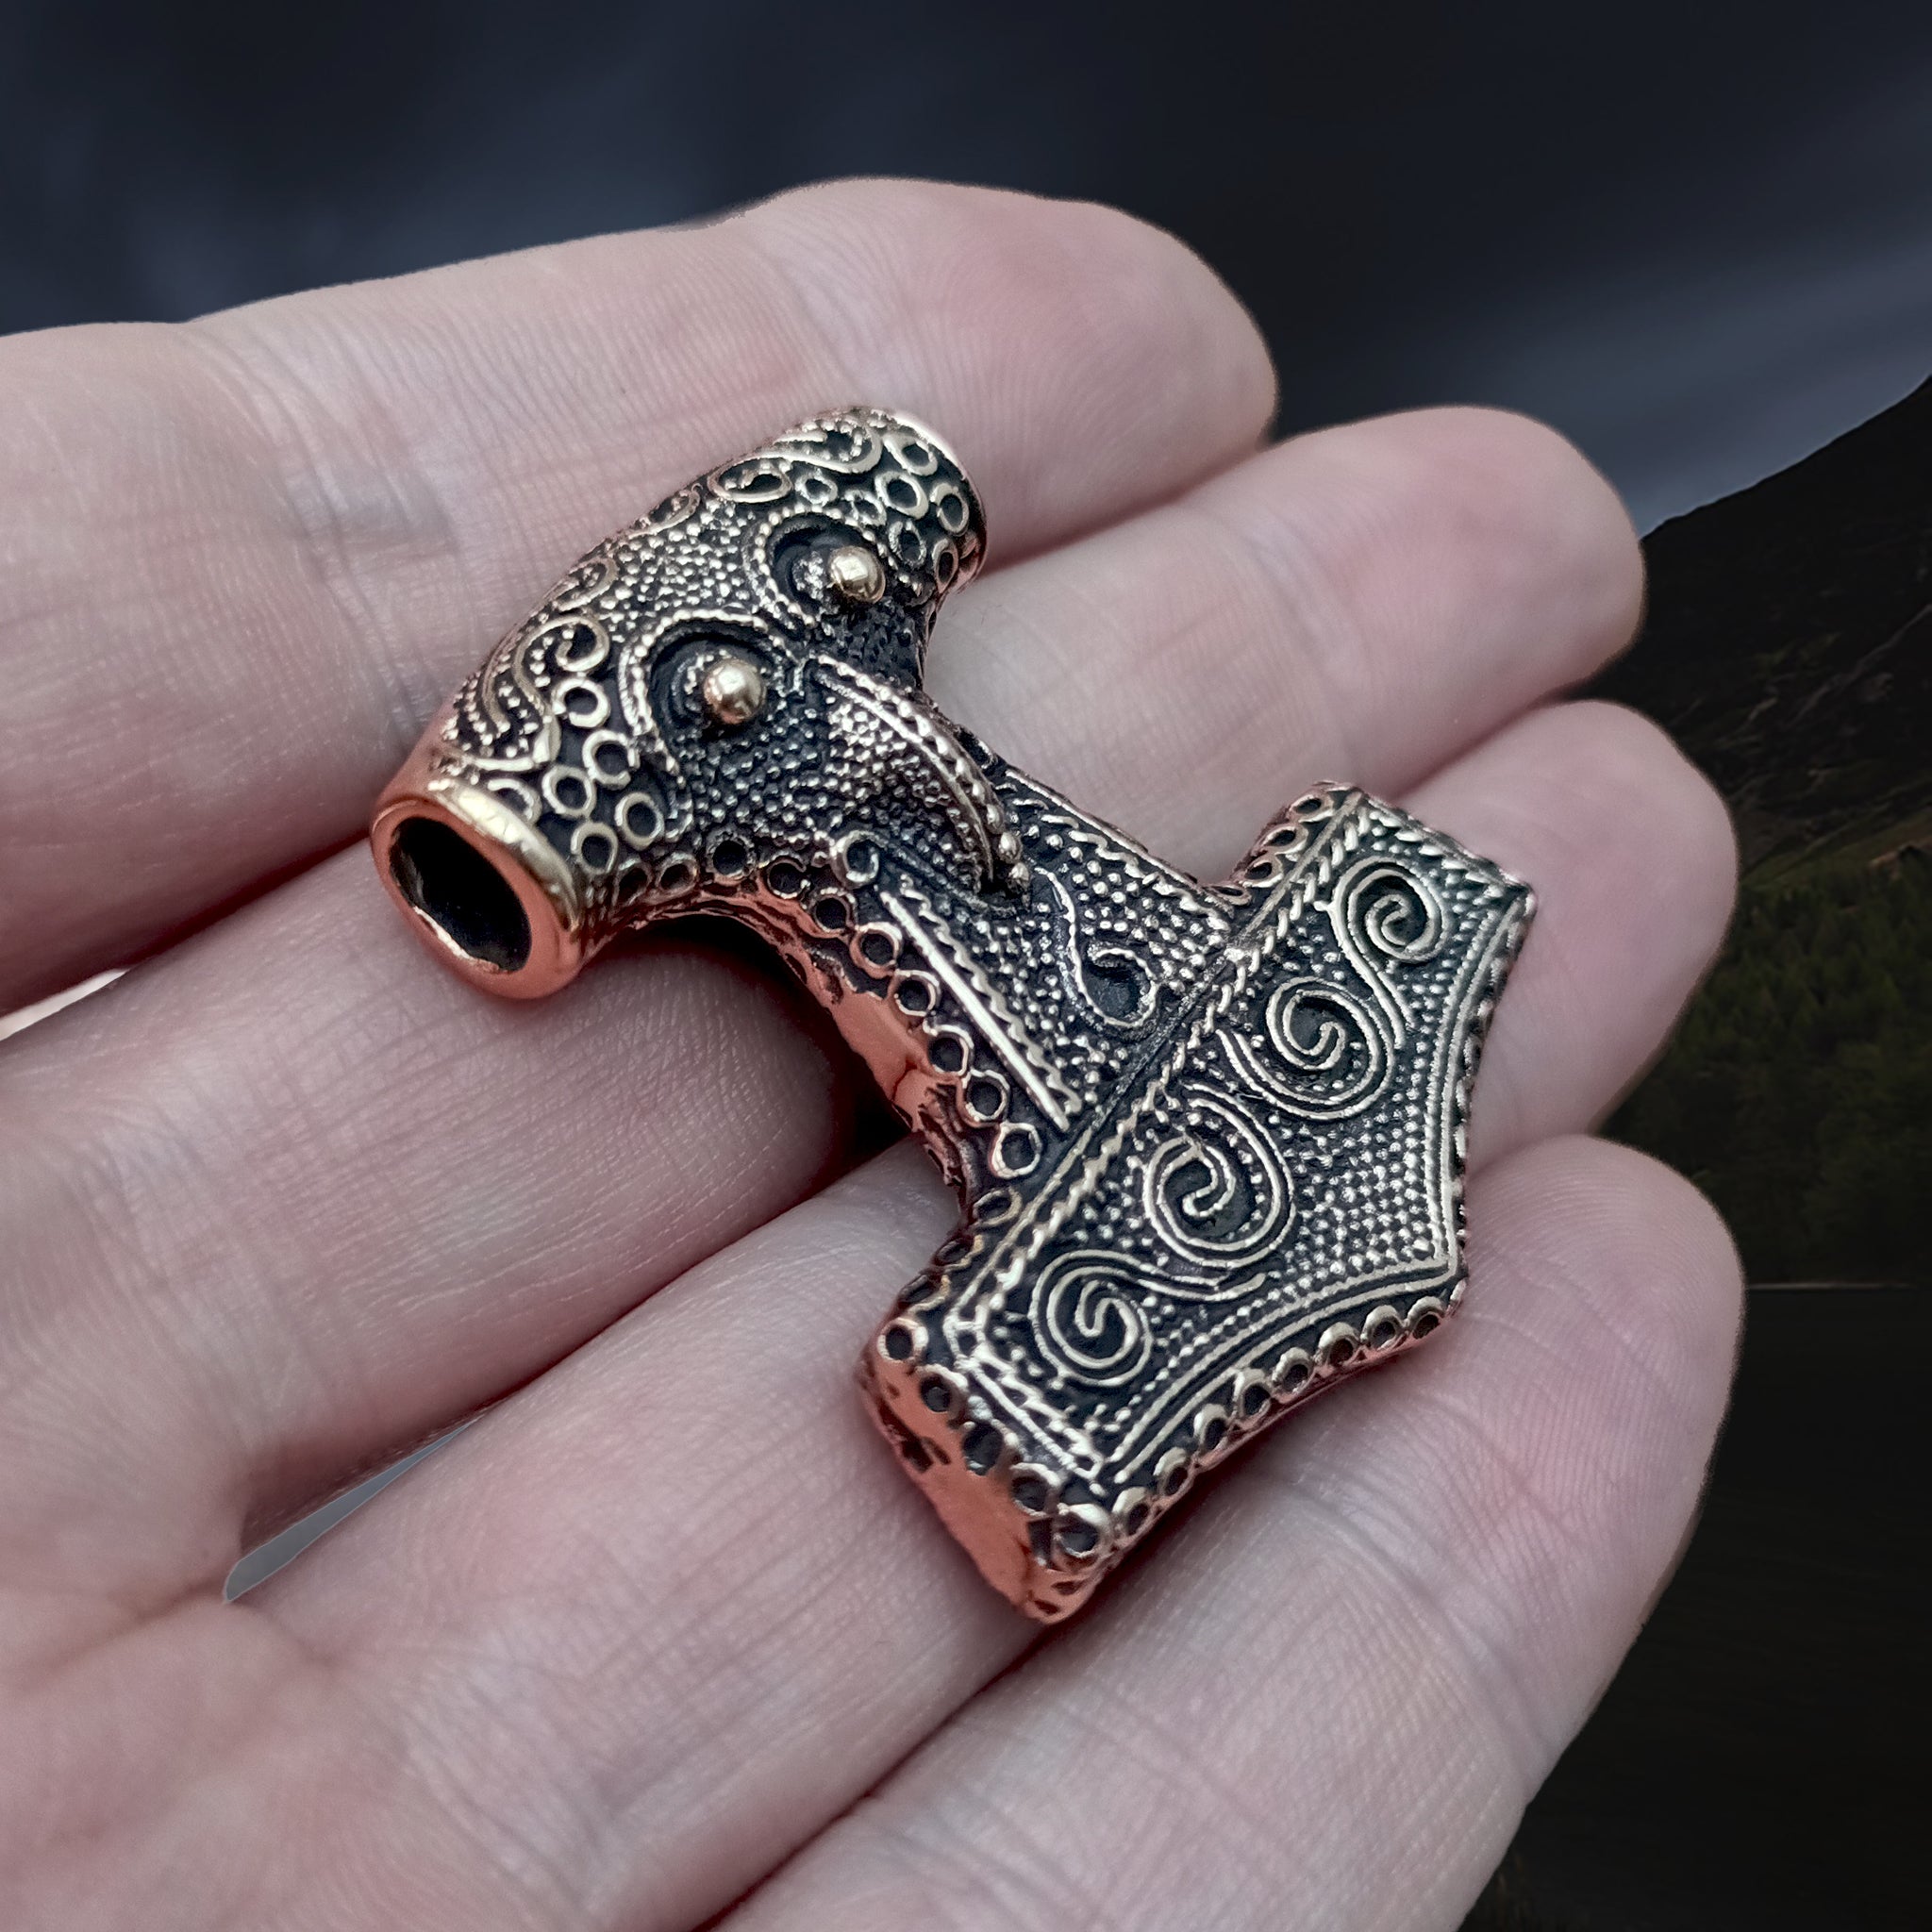 Large Bronze Skåne Thors Hammer Pendant on Hand - Side Angle View